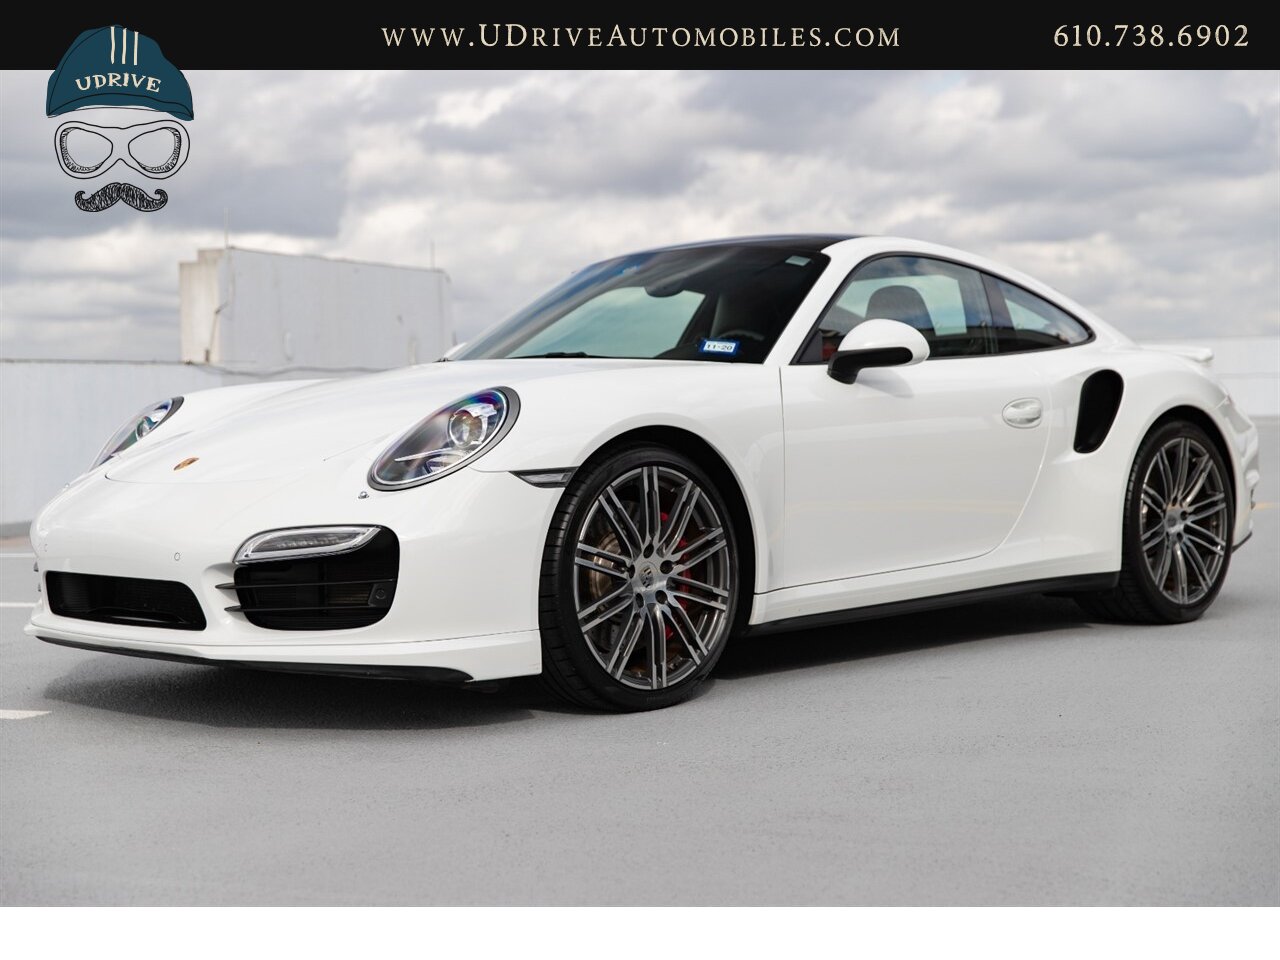 2014 Porsche 911 Turbo 12k Miles White over Black Chrono Rear Wiper  Sport Seats 20in Turbo Whls Sunroof Red Belts - Photo 7 - West Chester, PA 19382